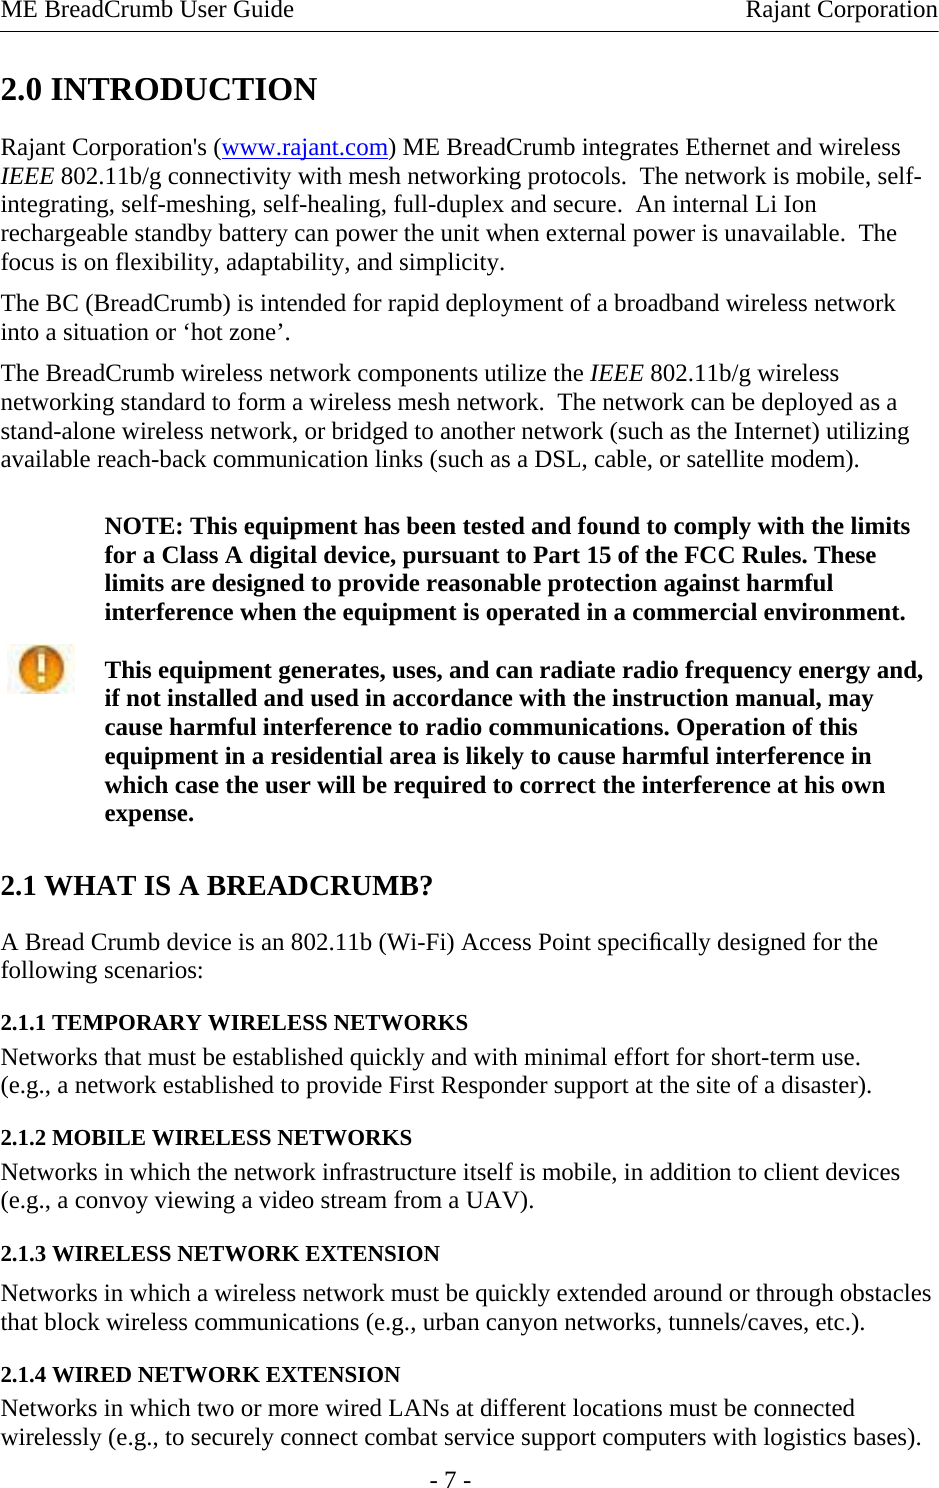 ME BreadCrumb User Guide    Rajant Corporation 2.0 INTRODUCTION Rajant Corporation&apos;s (www.rajant.com) ME BreadCrumb integrates Ethernet and wireless IEEE 802.11b/g connectivity with mesh networking protocols.  The network is mobile, self-integrating, self-meshing, self-healing, full-duplex and secure.  An internal Li Ion rechargeable standby battery can power the unit when external power is unavailable.  The focus is on flexibility, adaptability, and simplicity. The BC (BreadCrumb) is intended for rapid deployment of a broadband wireless network into a situation or ‘hot zone’. The BreadCrumb wireless network components utilize the IEEE 802.11b/g wireless networking standard to form a wireless mesh network.  The network can be deployed as a stand-alone wireless network, or bridged to another network (such as the Internet) utilizing available reach-back communication links (such as a DSL, cable, or satellite modem). NOTE: This equipment has been tested and found to comply with the limits for a Class A digital device, pursuant to Part 15 of the FCC Rules. These limits are designed to provide reasonable protection against harmful interference when the equipment is operated in a commercial environment.  This equipment generates, uses, and can radiate radio frequency energy and, if not installed and used in accordance with the instruction manual, may cause harmful interference to radio communications. Operation of this equipment in a residential area is likely to cause harmful interference in which case the user will be required to correct the interference at his own expense.   2.1 WHAT IS A BREADCRUMB?  A Bread Crumb device is an 802.11b (Wi-Fi) Access Point speciﬁcally designed for the following scenarios:  2.1.1 TEMPORARY WIRELESS NETWORKS  Networks that must be established quickly and with minimal effort for short-term use.  (e.g., a network established to provide First Responder support at the site of a disaster). 2.1.2 MOBILE WIRELESS NETWORKS  Networks in which the network infrastructure itself is mobile, in addition to client devices (e.g., a convoy viewing a video stream from a UAV). 2.1.3 WIRELESS NETWORK EXTENSION  Networks in which a wireless network must be quickly extended around or through obstacles that block wireless communications (e.g., urban canyon networks, tunnels/caves, etc.).  2.1.4 WIRED NETWORK EXTENSION  Networks in which two or more wired LANs at different locations must be connected wirelessly (e.g., to securely connect combat service support computers with logistics bases).   - 7 - 